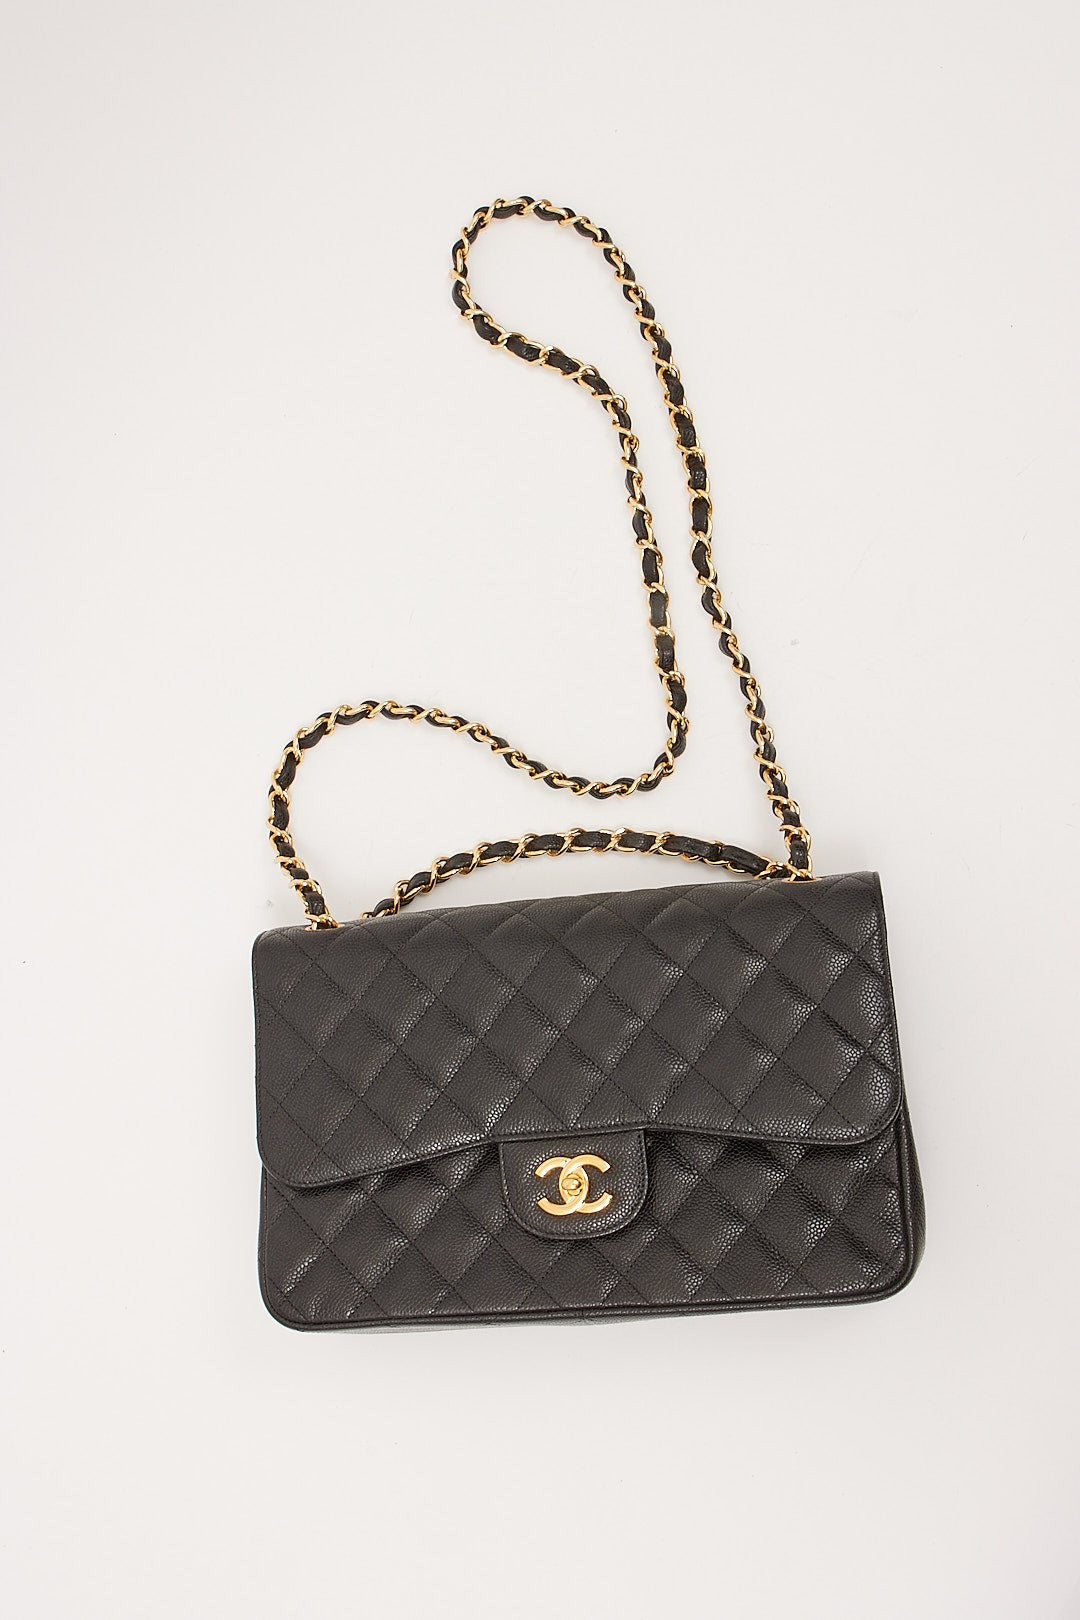 Chanel Black Caviar Quilted Jumbo Double Flap Bag GHW